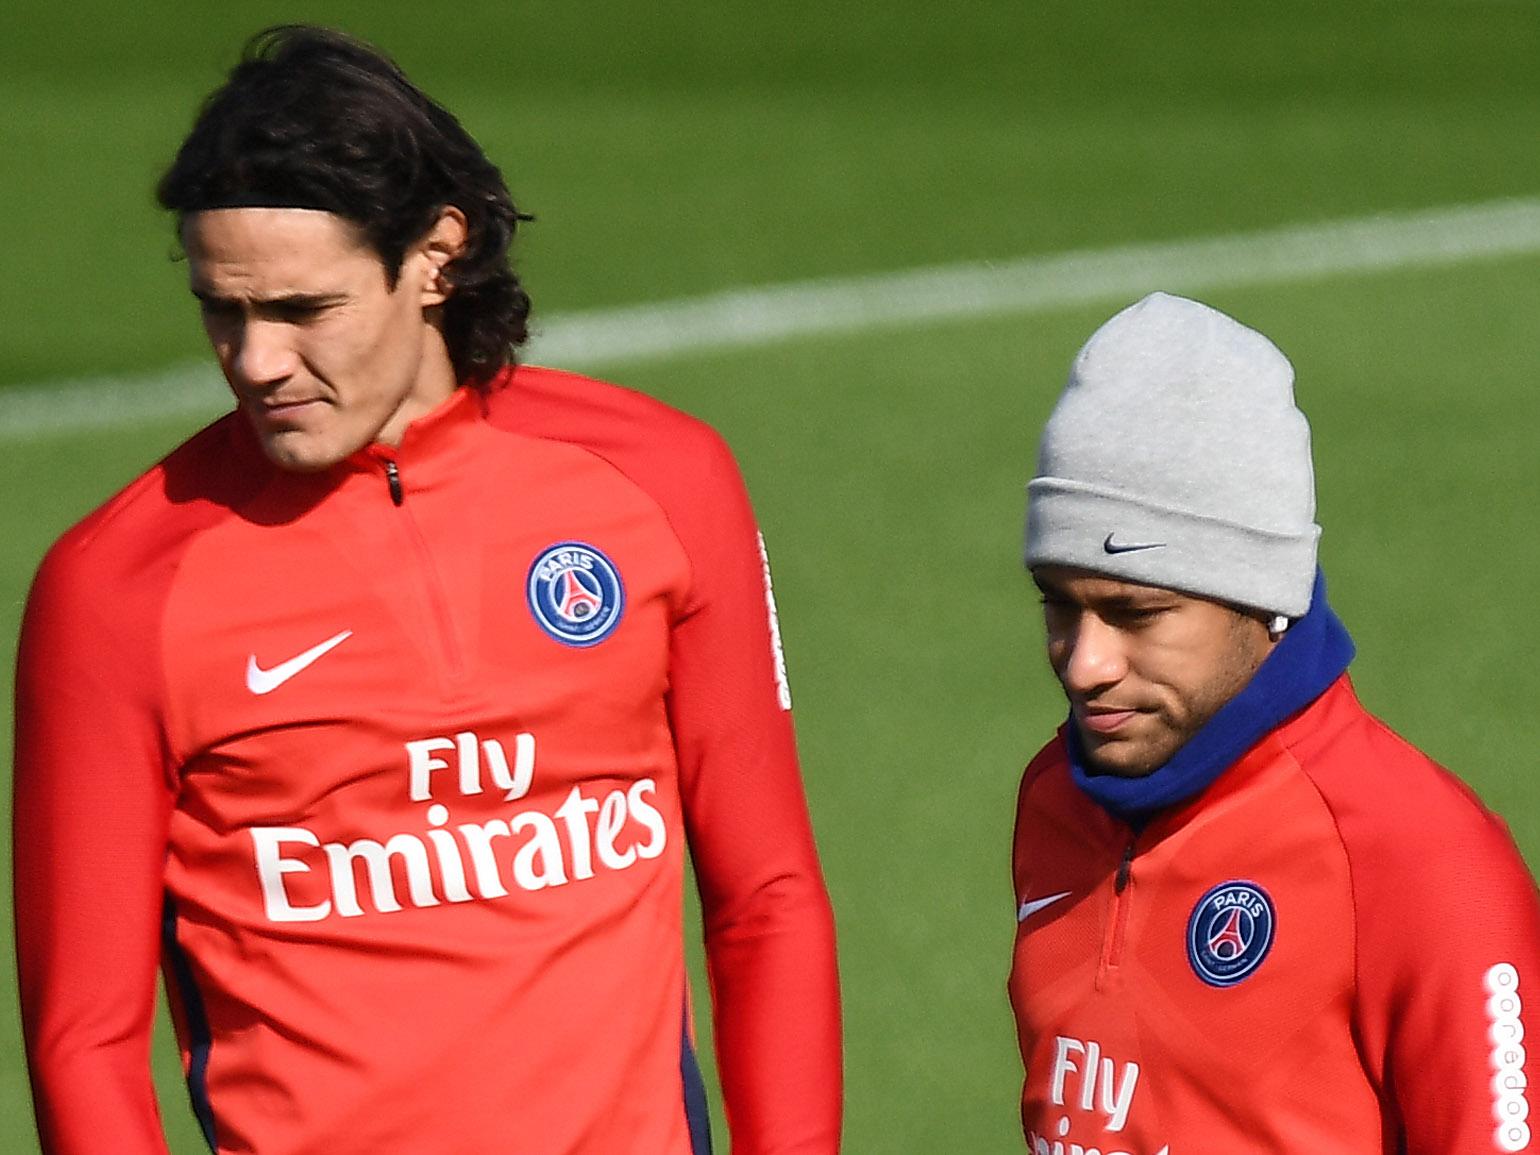 There are reports of a huge rift in the PSG dressing room